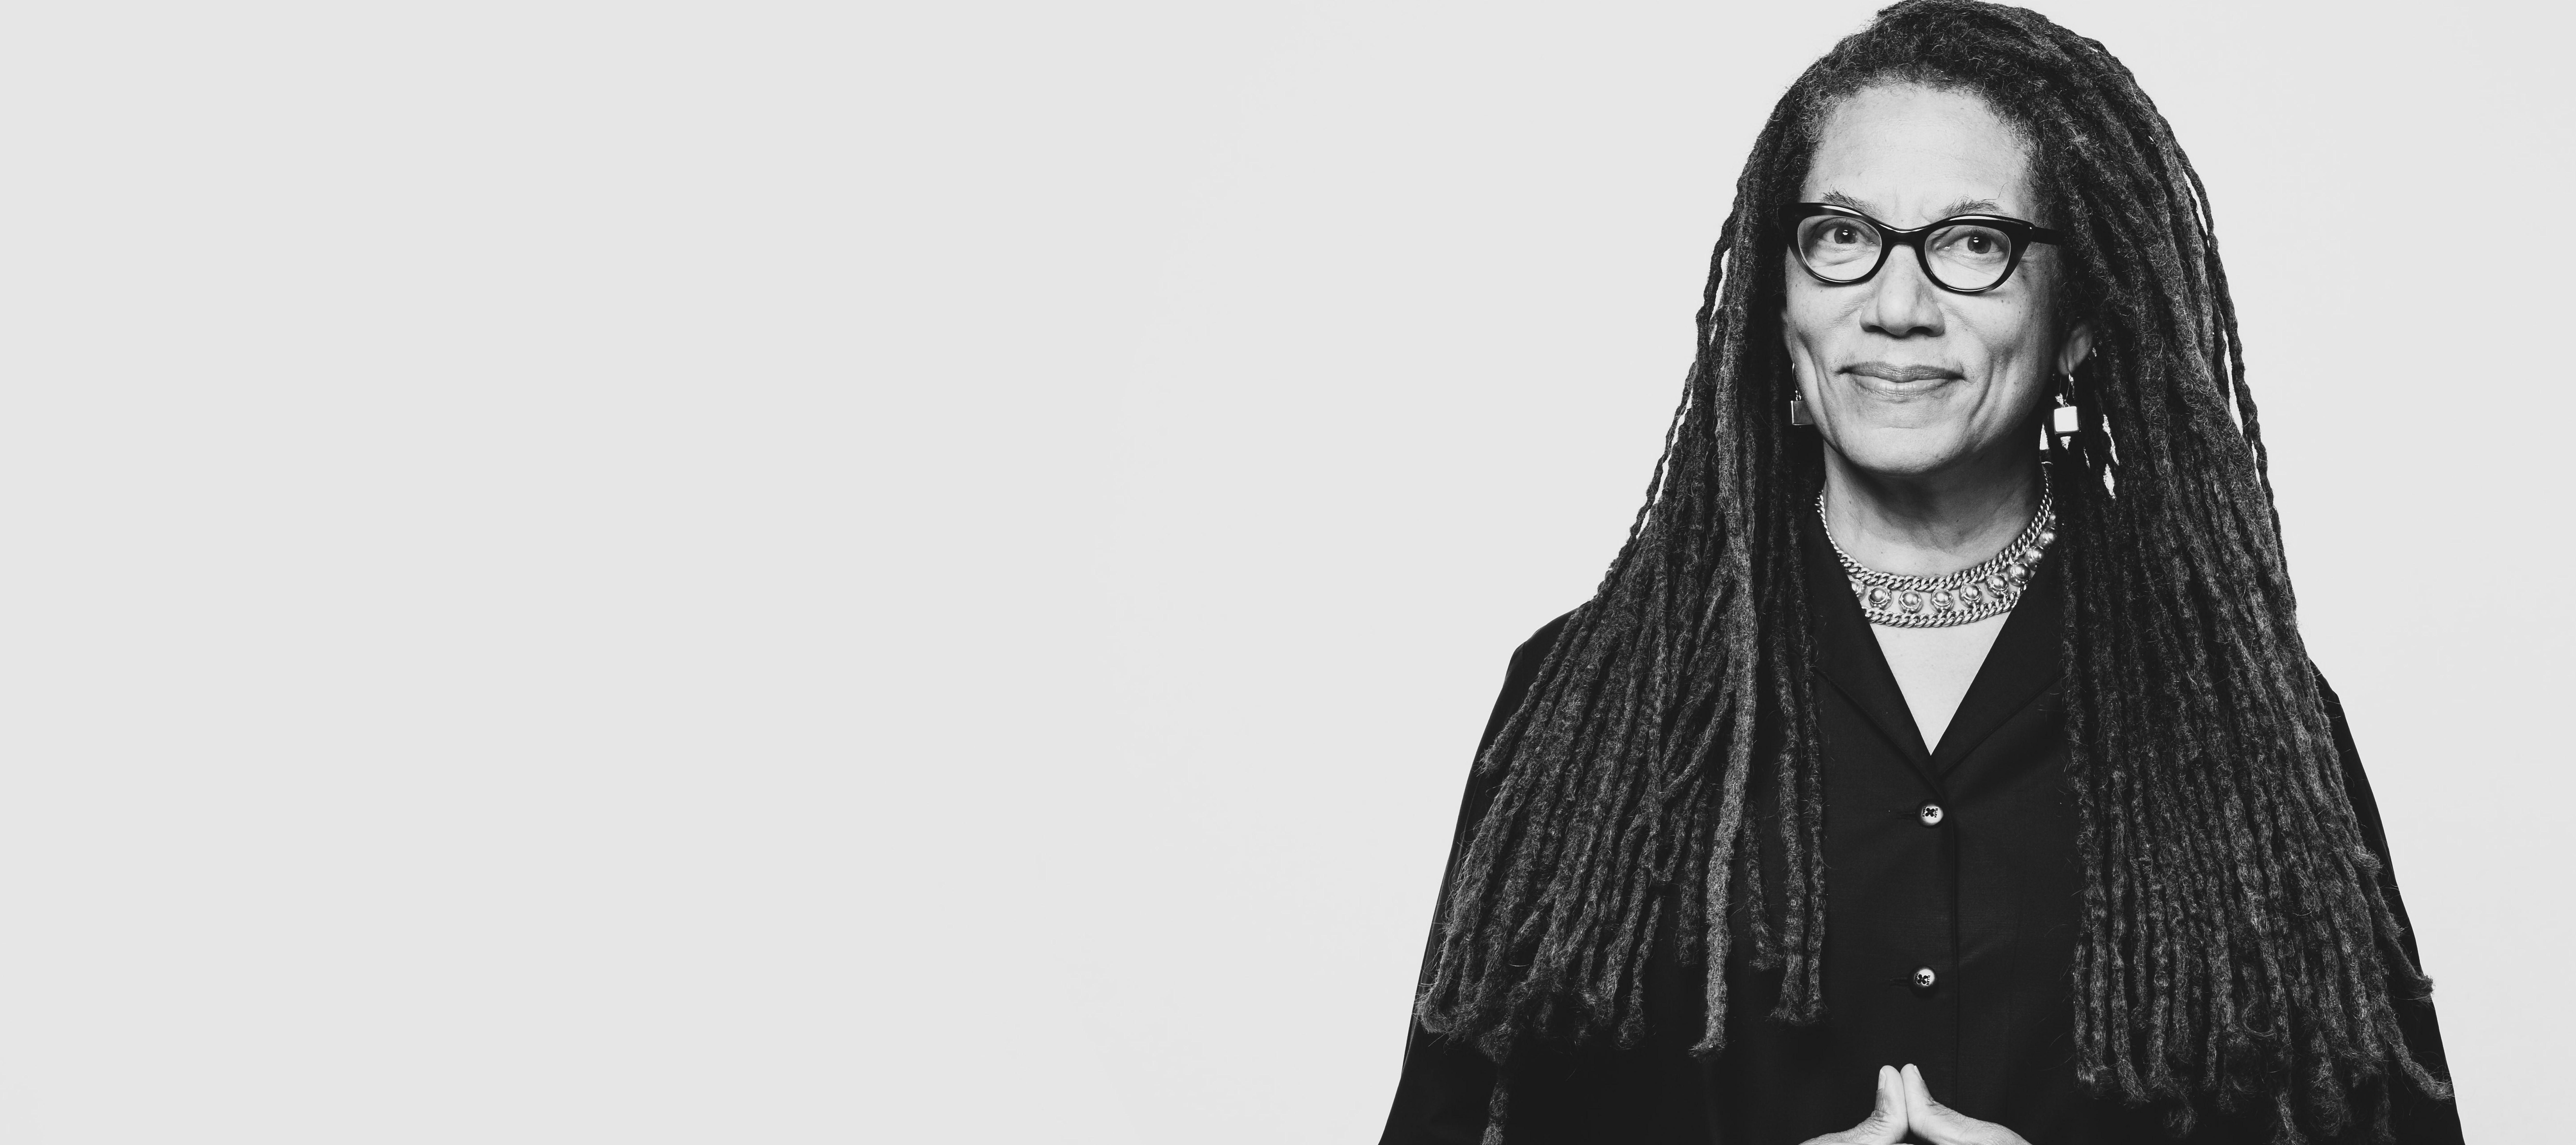 A black-and-white photo of an light-skinned African American woman with long dreadlocks. She wears a button-up black shirt and black-rimmed glasses. She stands with her hands clasped in front of her and smiles warmly at the camera.